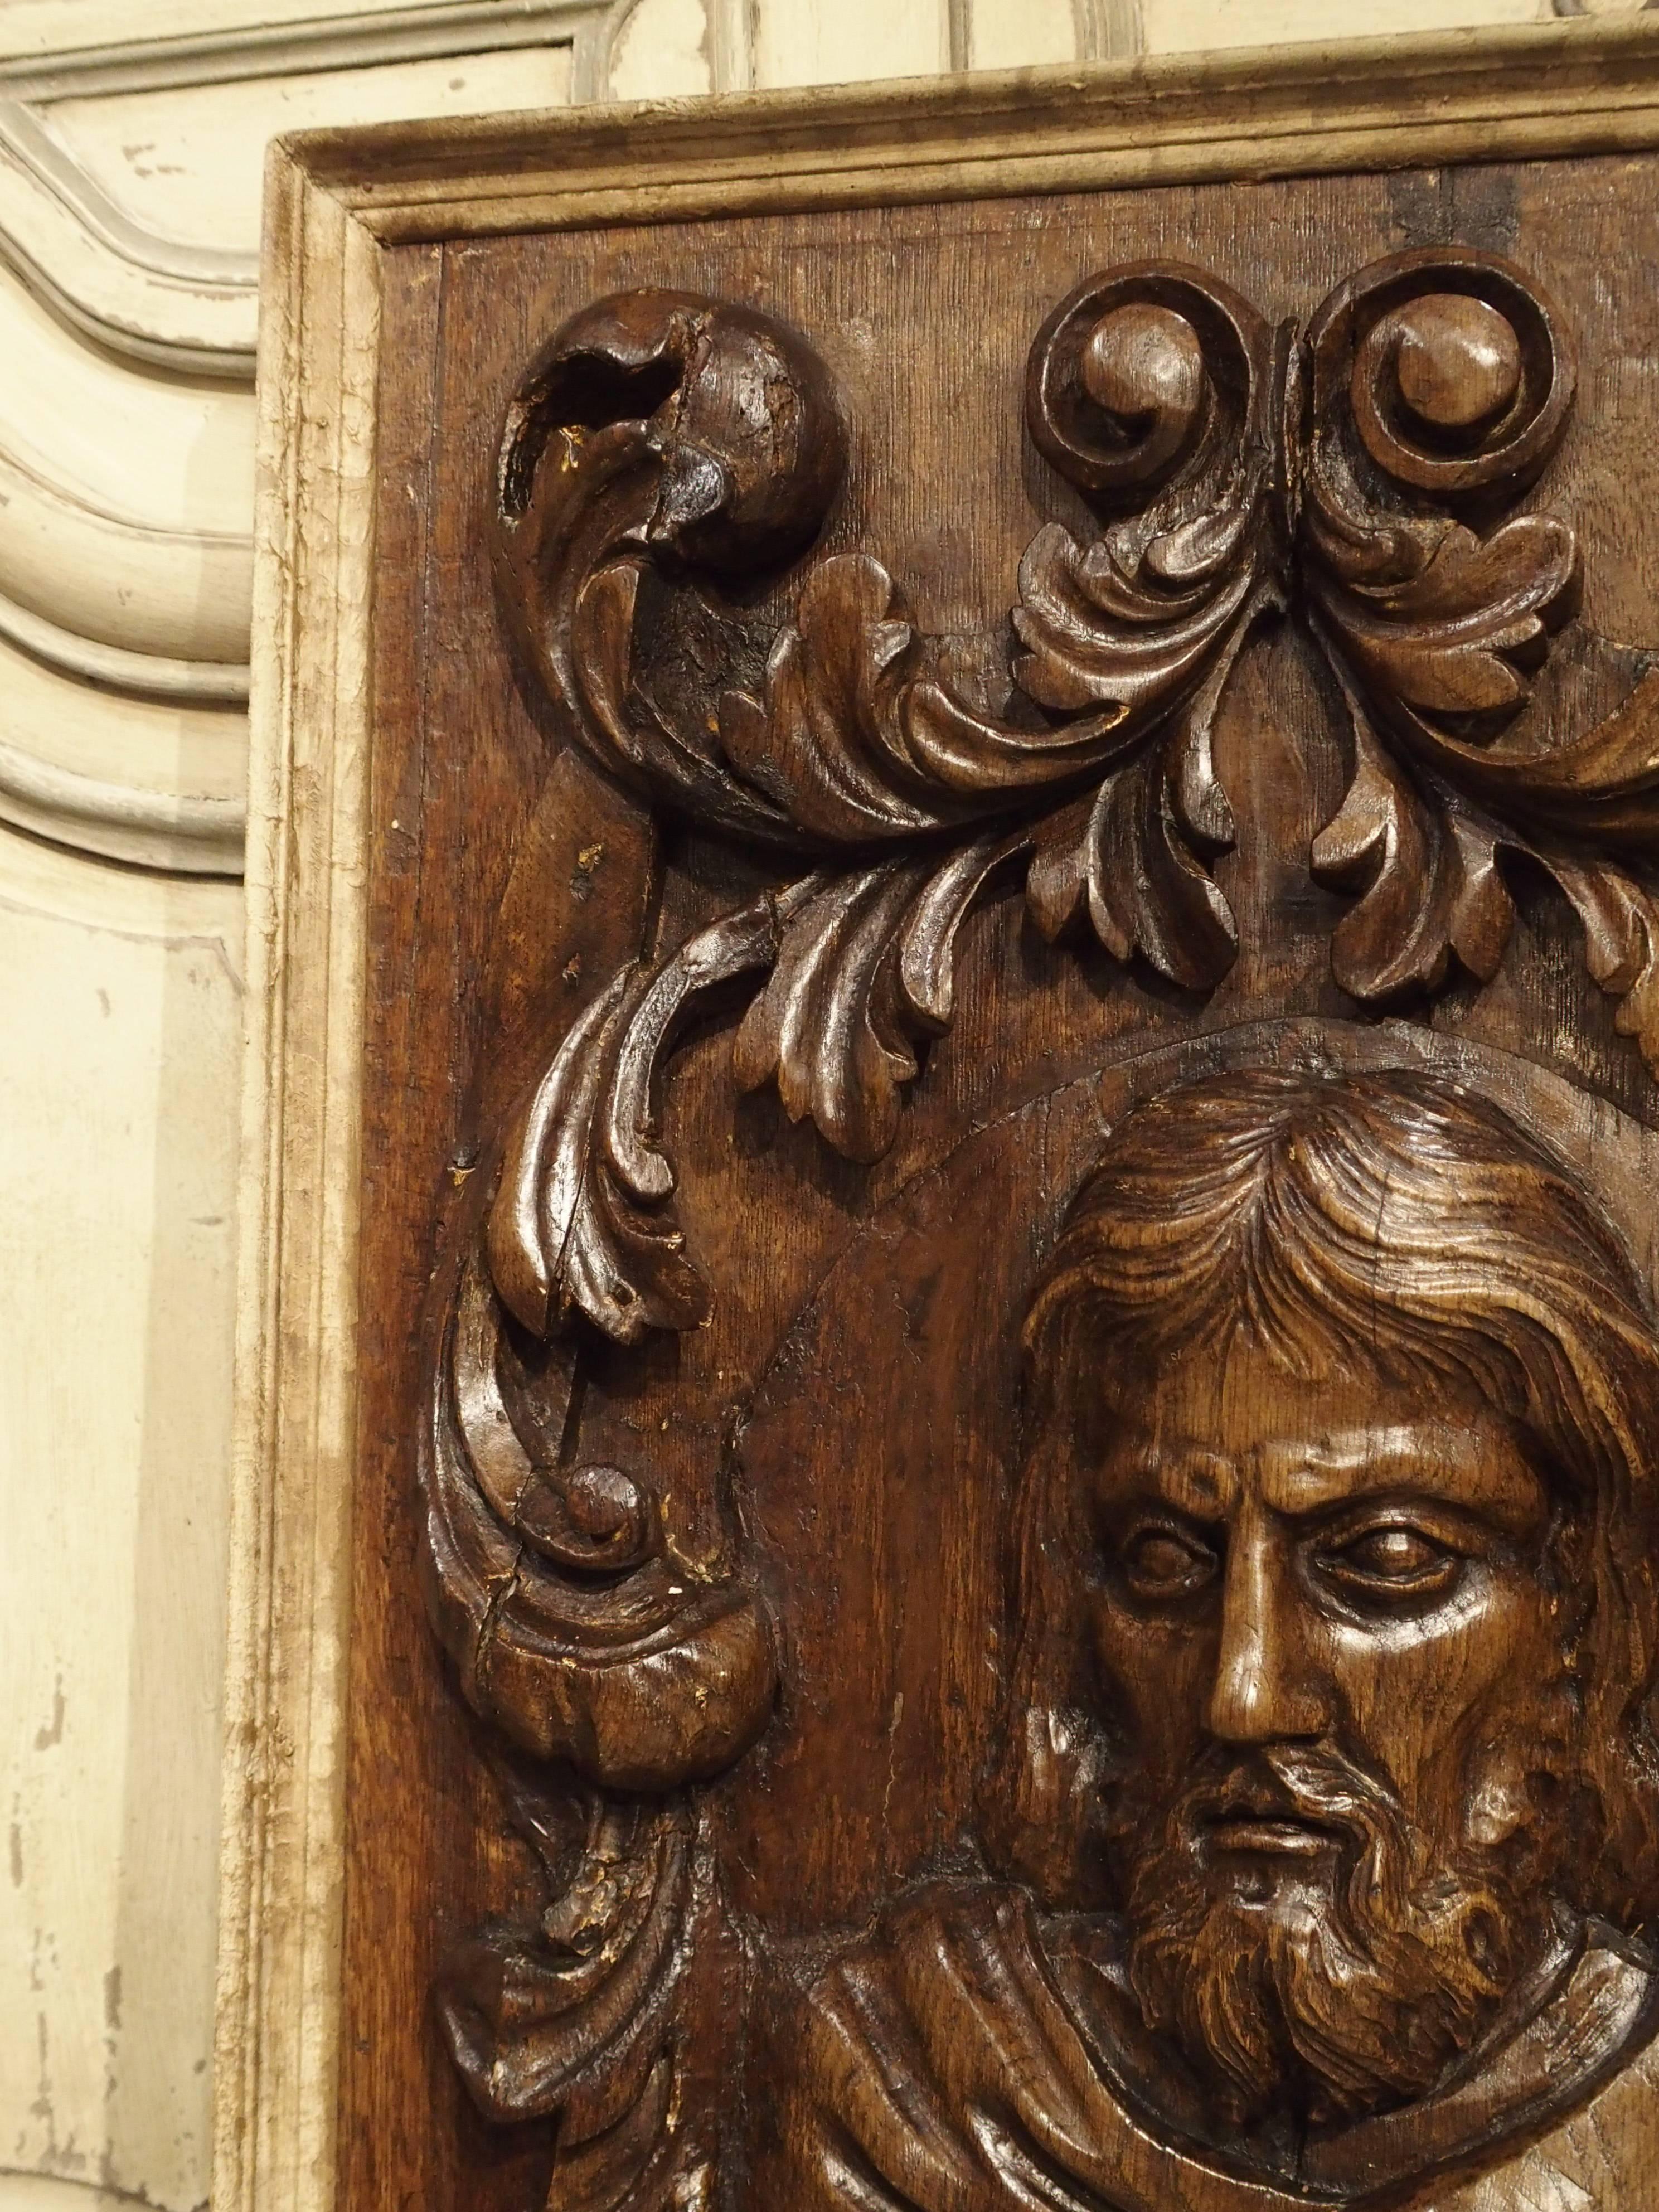 This hand-carved wooden relief is of St. Mark and the winged lion, the symbol of Venice. The plaque dates to the 1700s. The hand carving is deep and in proportion, obviously done by a master carver. The motifs surrounding St. Mark are C-scroll